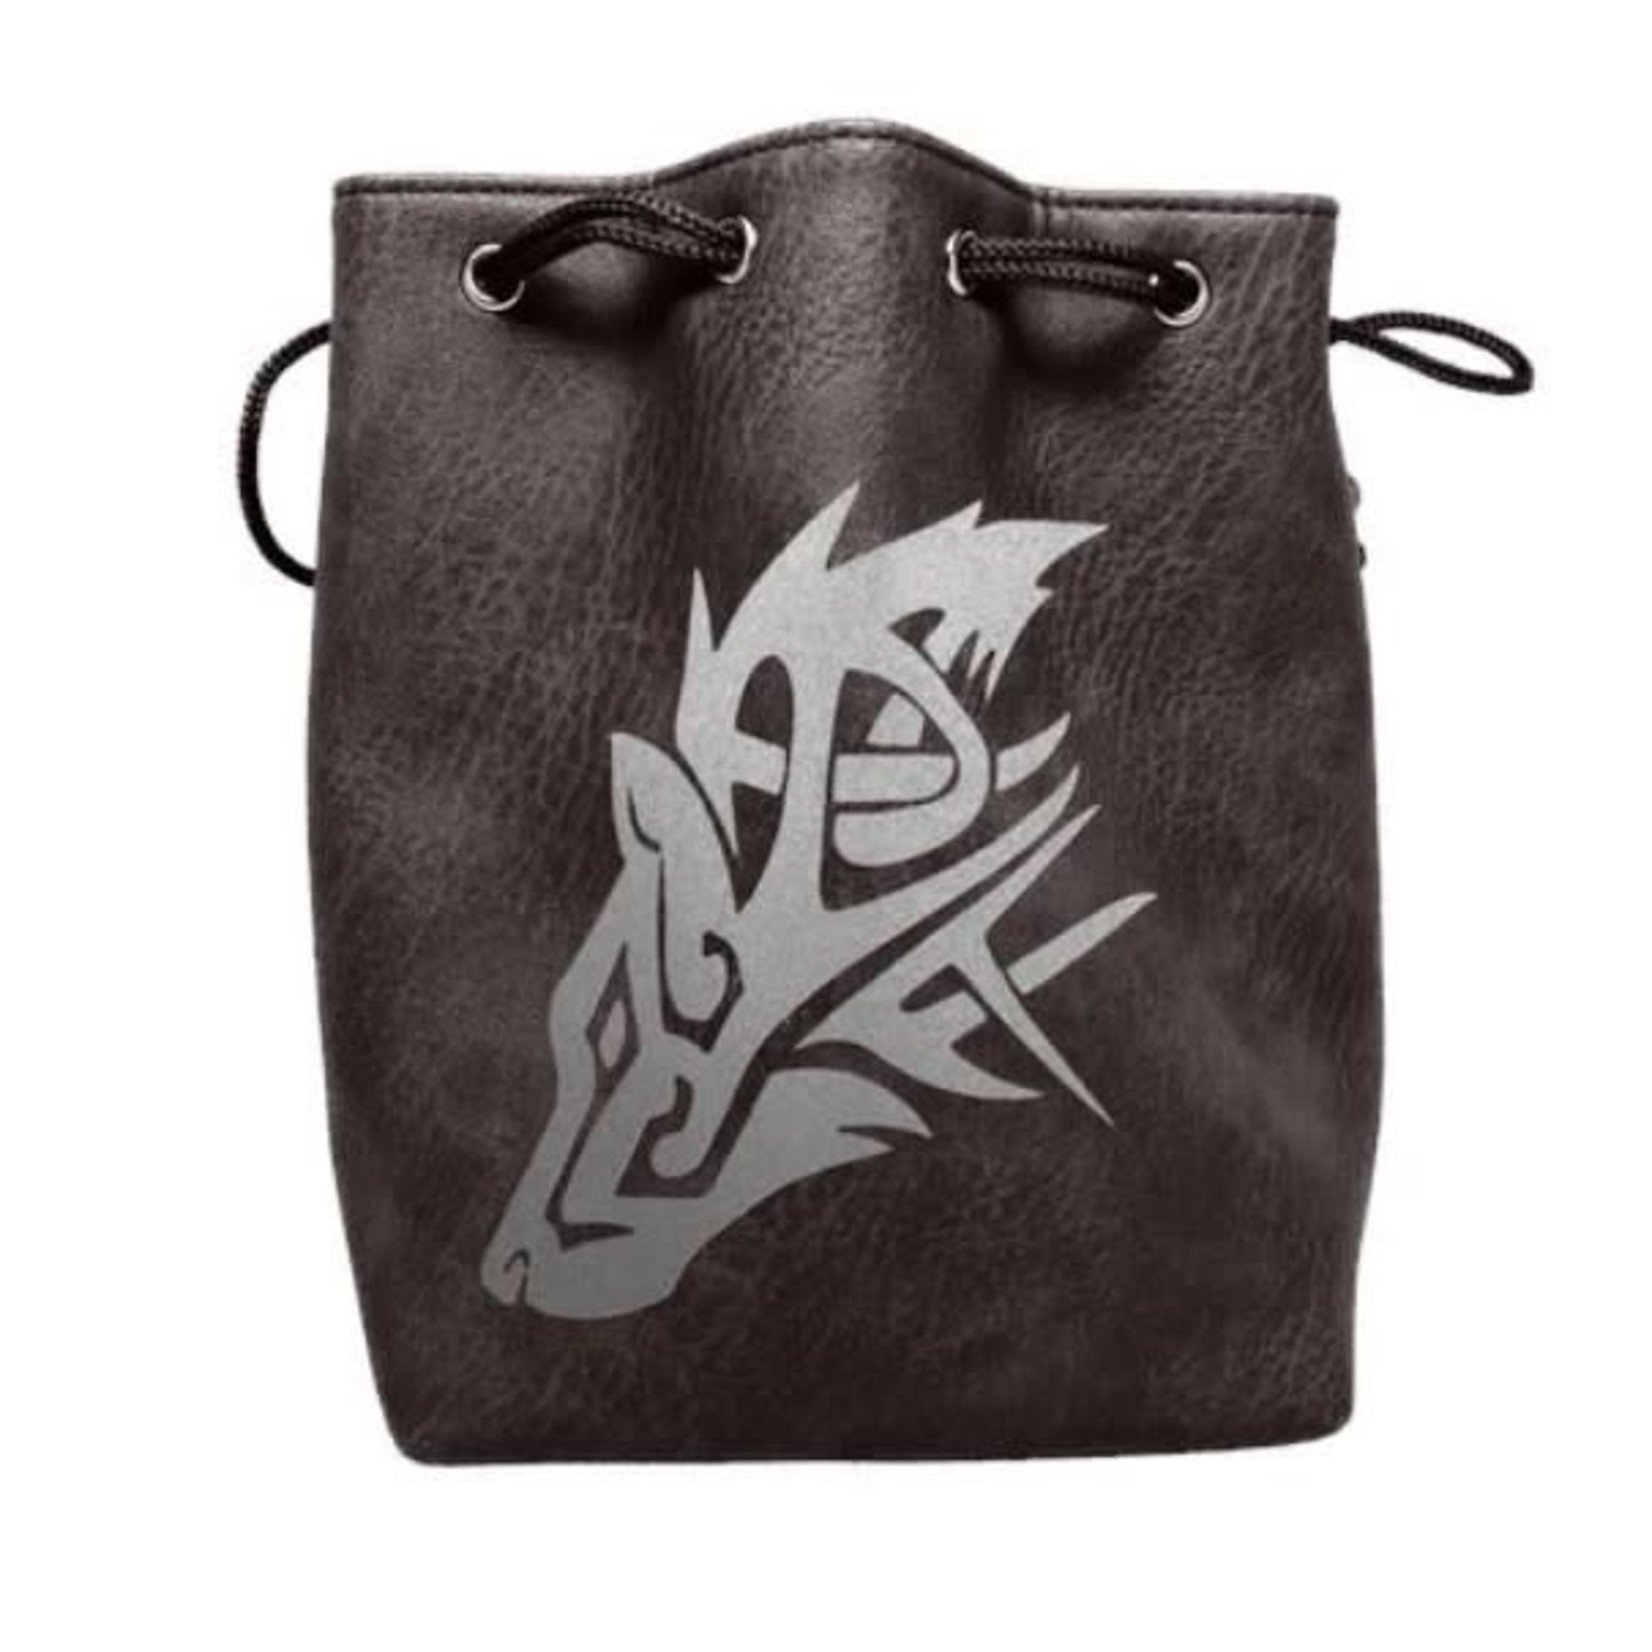 Easy Roller Dice Leather Lite Self-Standing Large Dice Bag